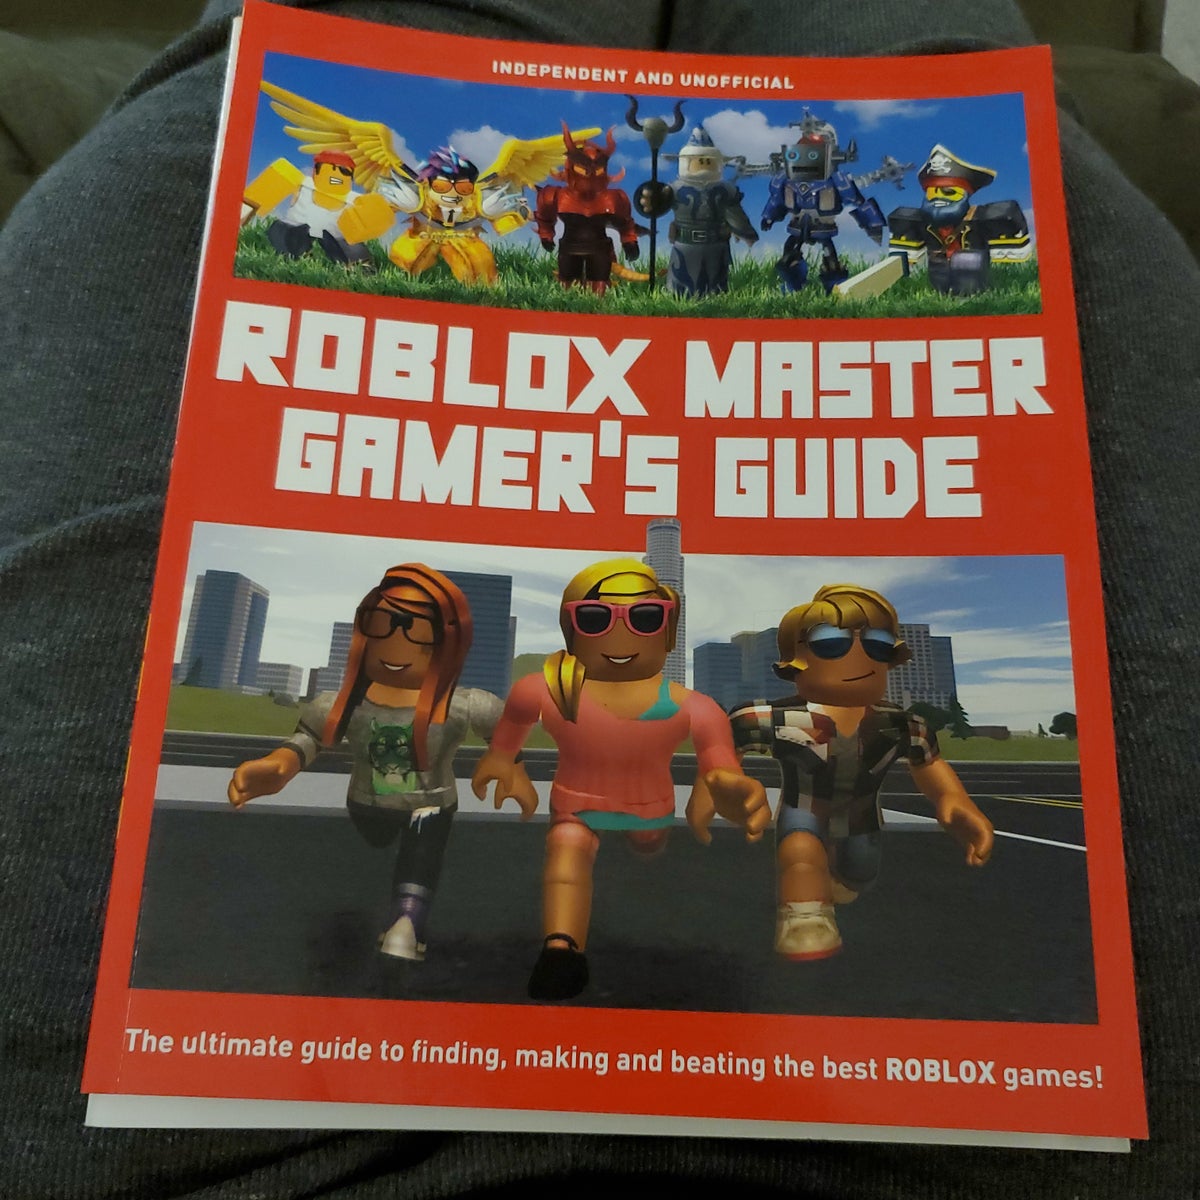 Make Your Own Roblox Games: A Step-by-Step Guide (Paperback)